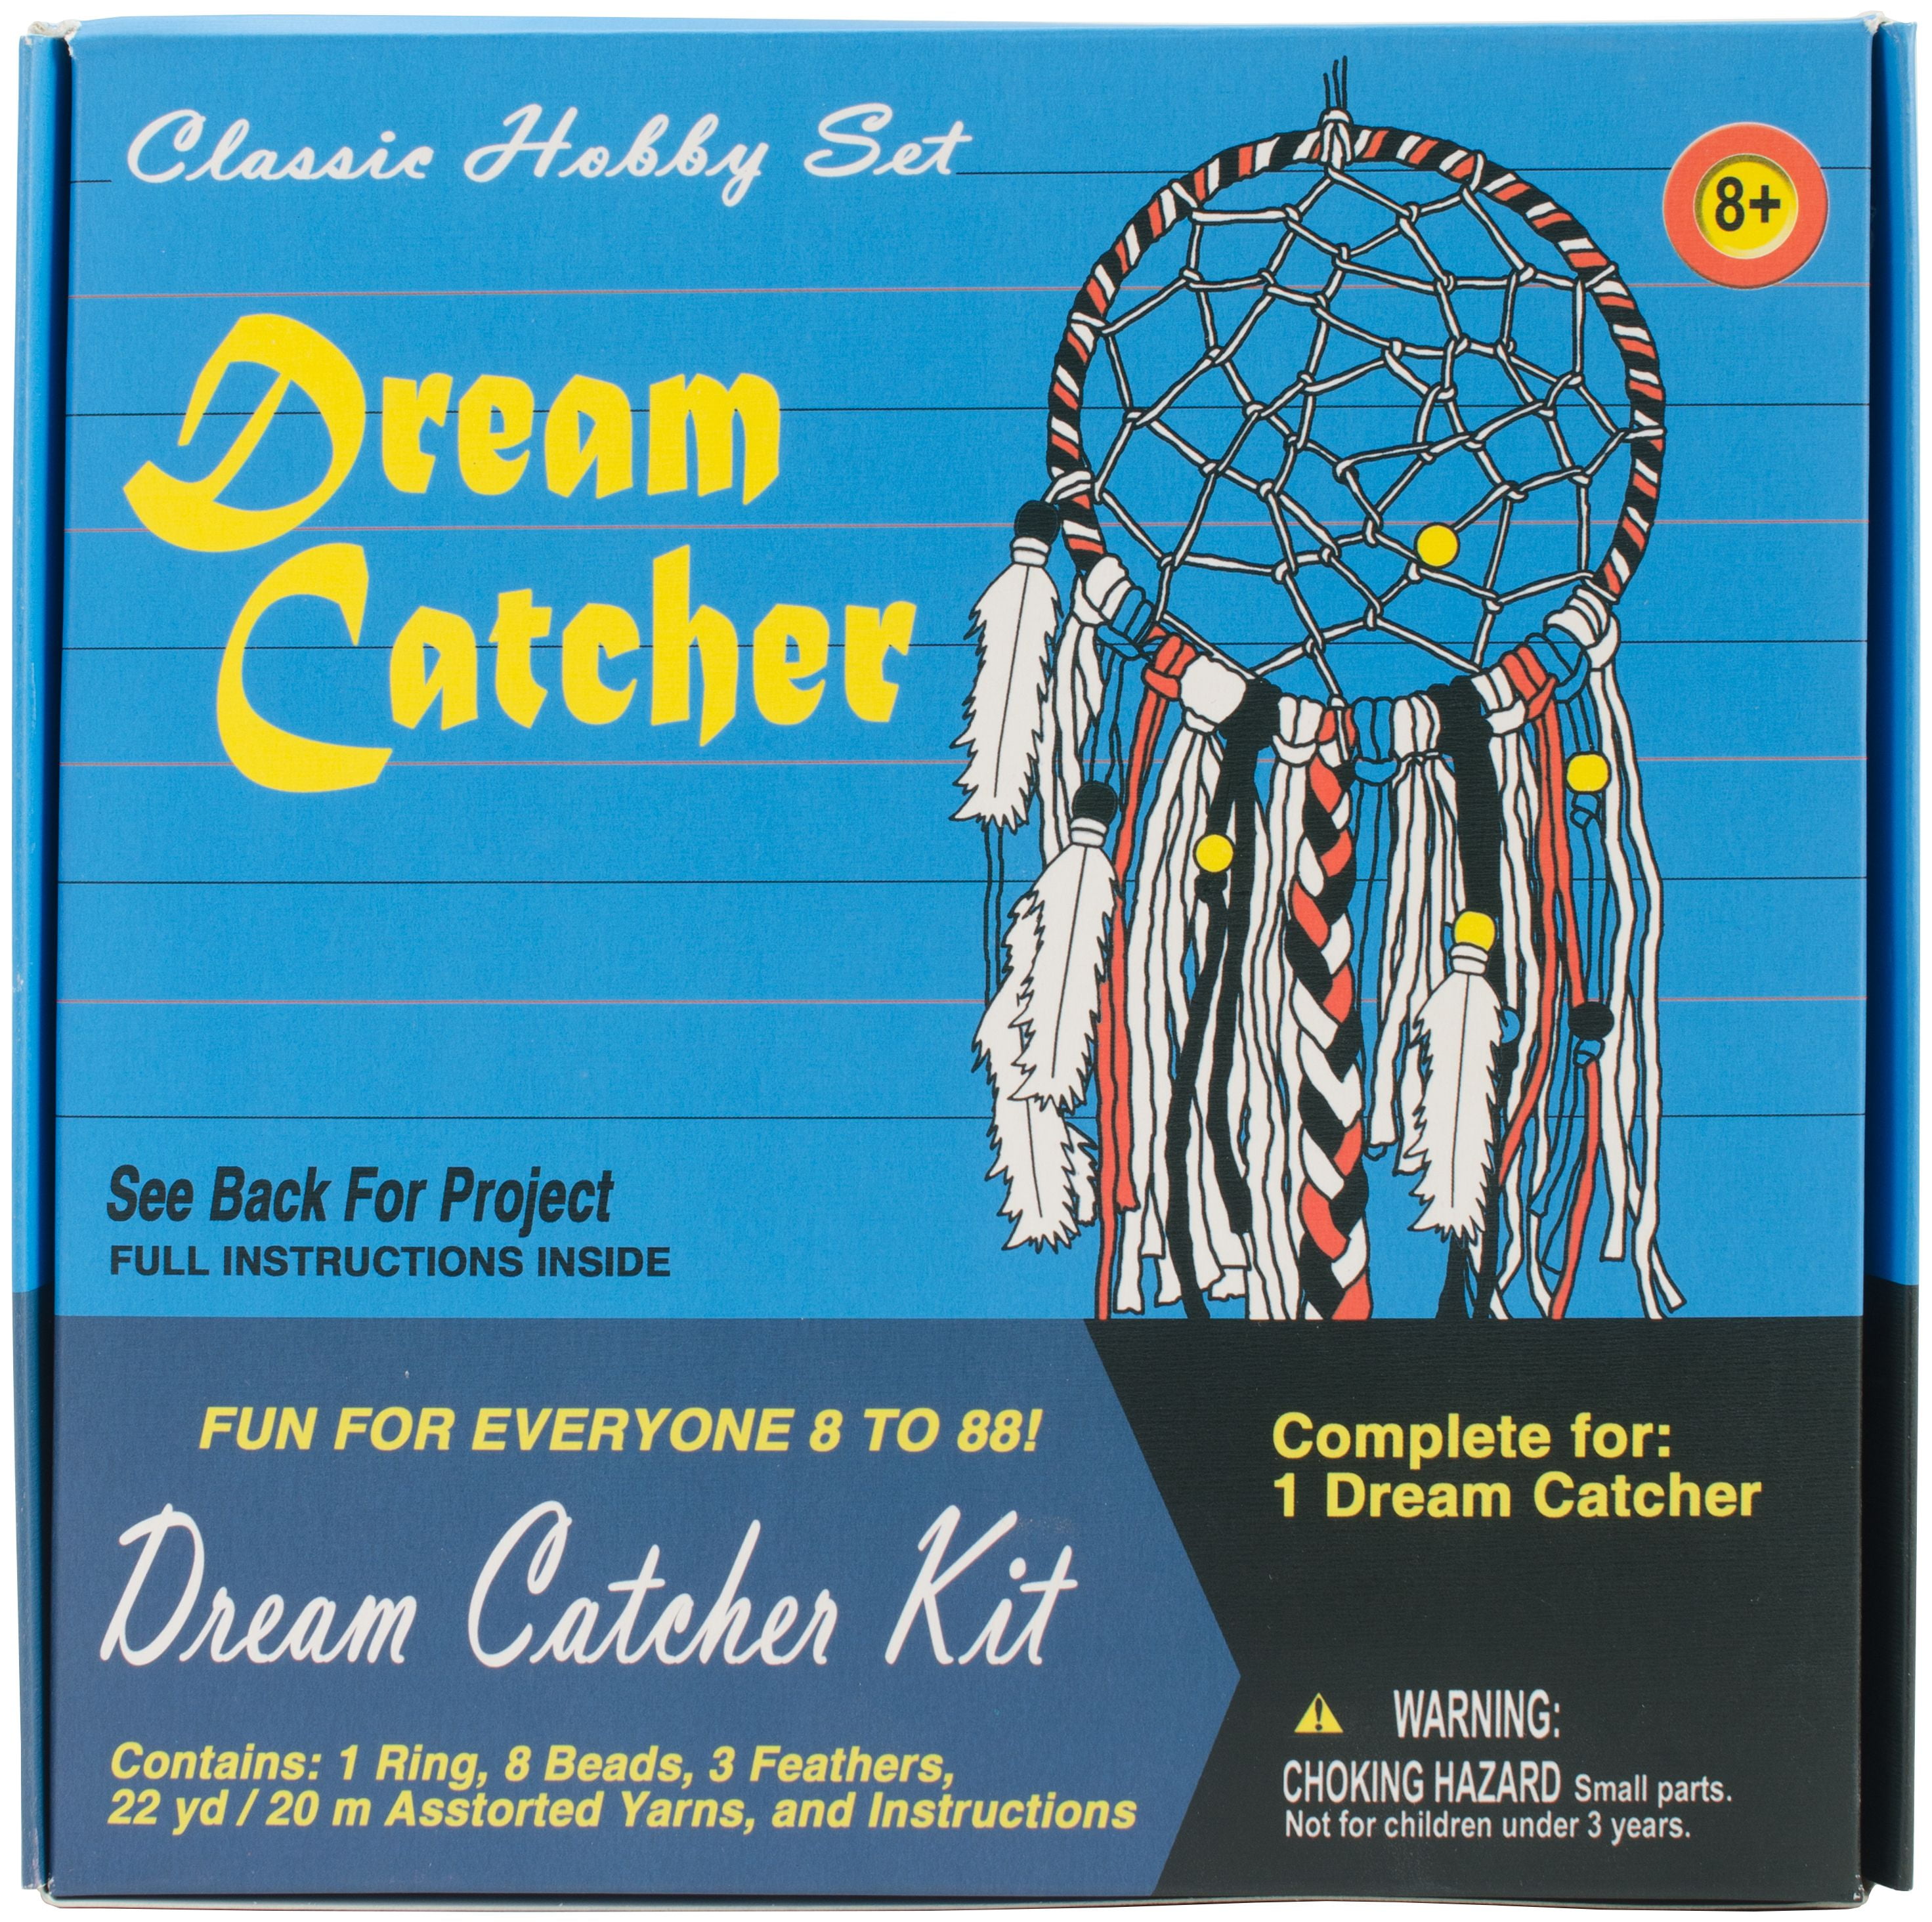 Make Your Own Dream Catcher Arts And Crafts Activity Kit For Kids Gift New 